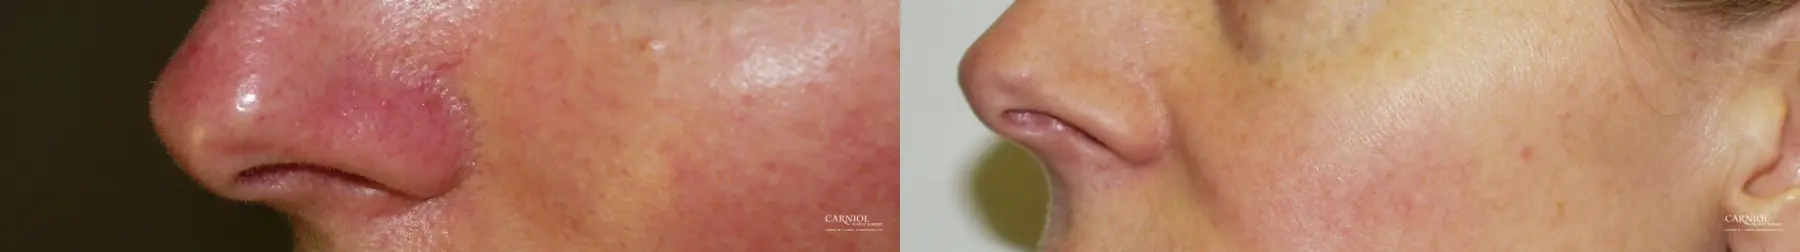 Rosacea: Patient 1 - Before and After  